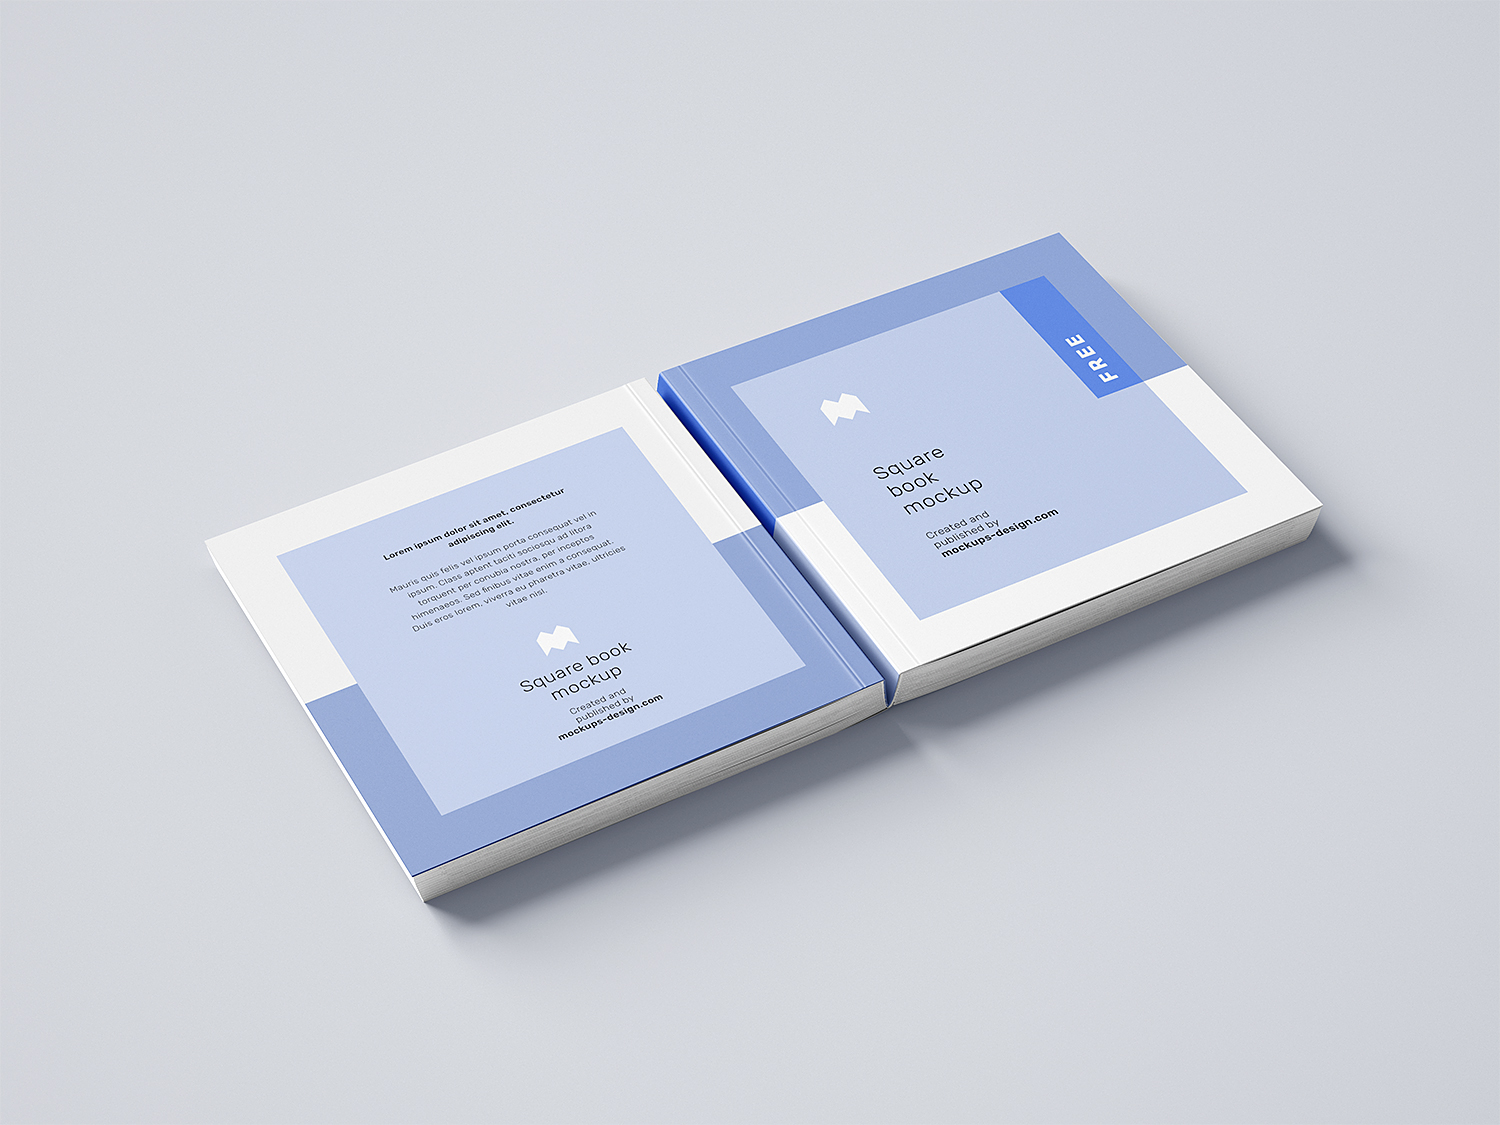 Free-Softcover-Square-Book-Mockup-11